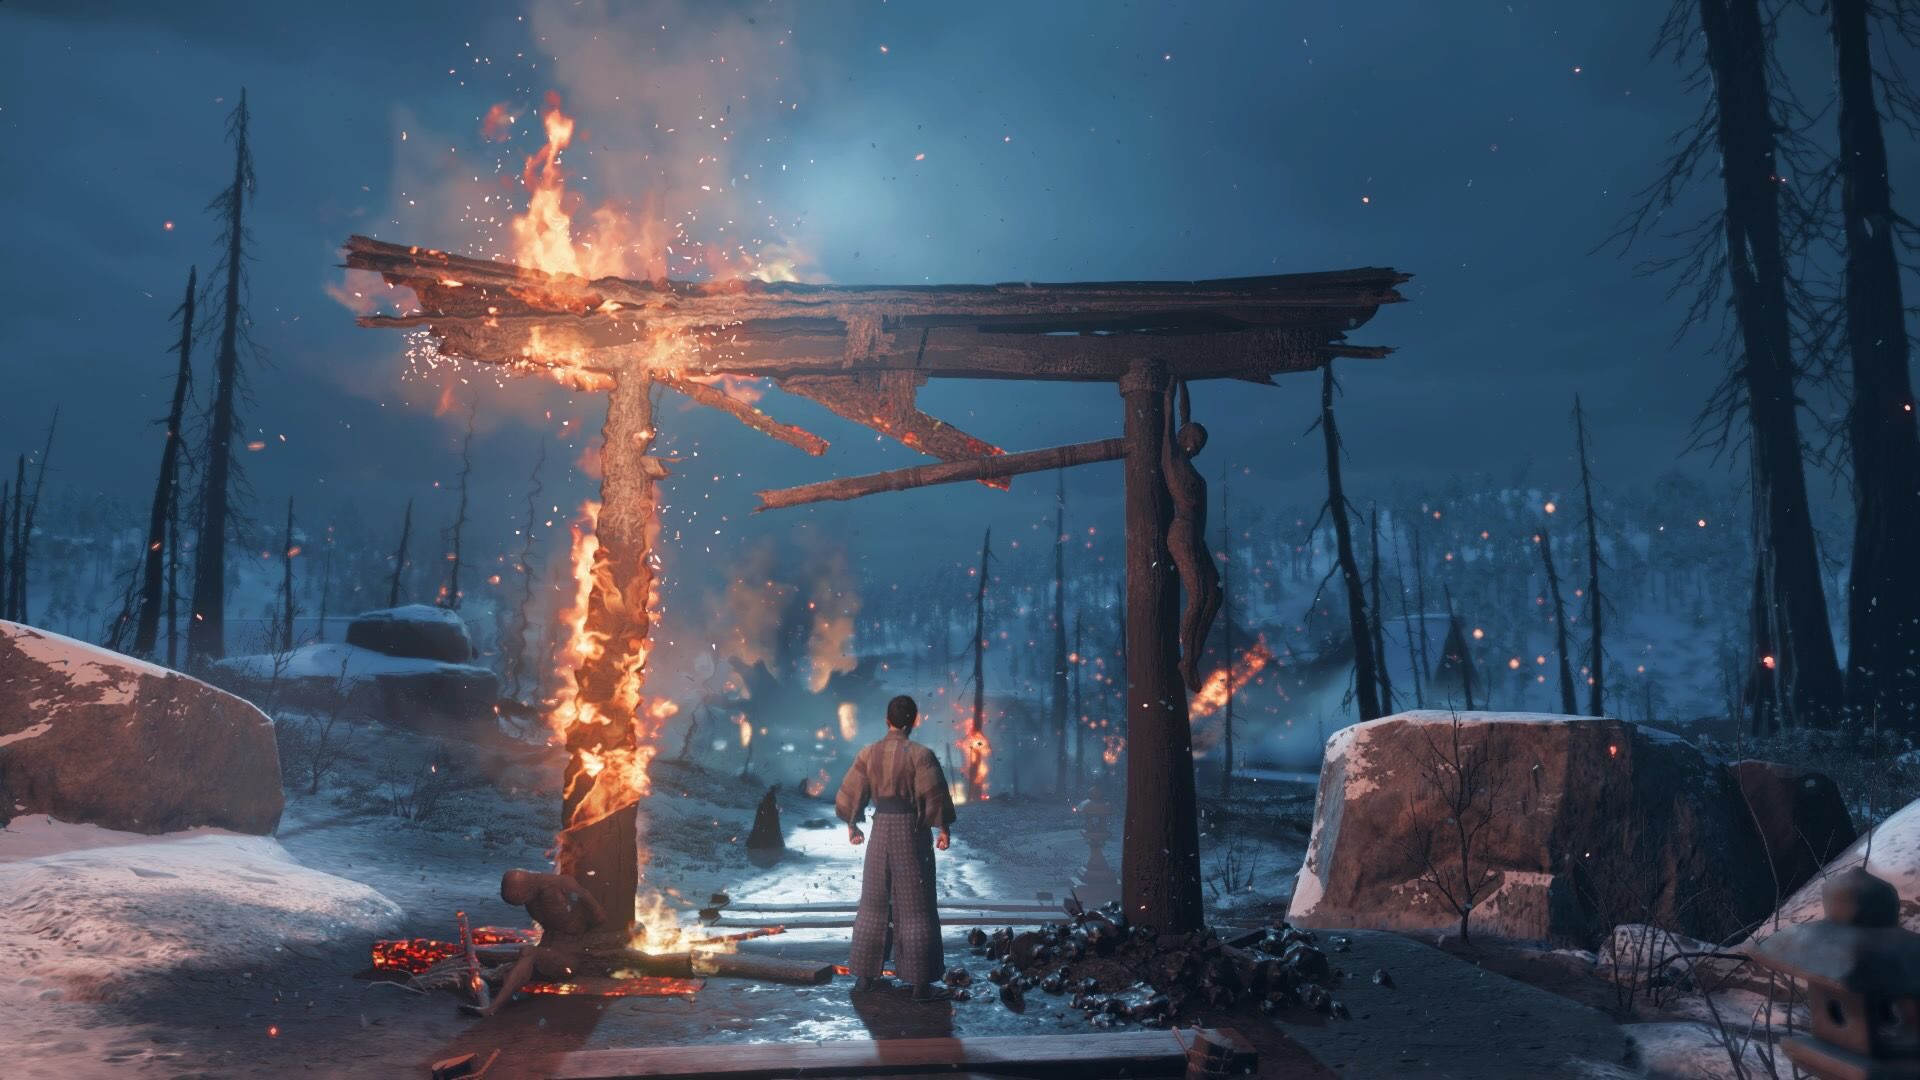 Why More Games Should Have Photo Modes Like Ghost of Tsushima